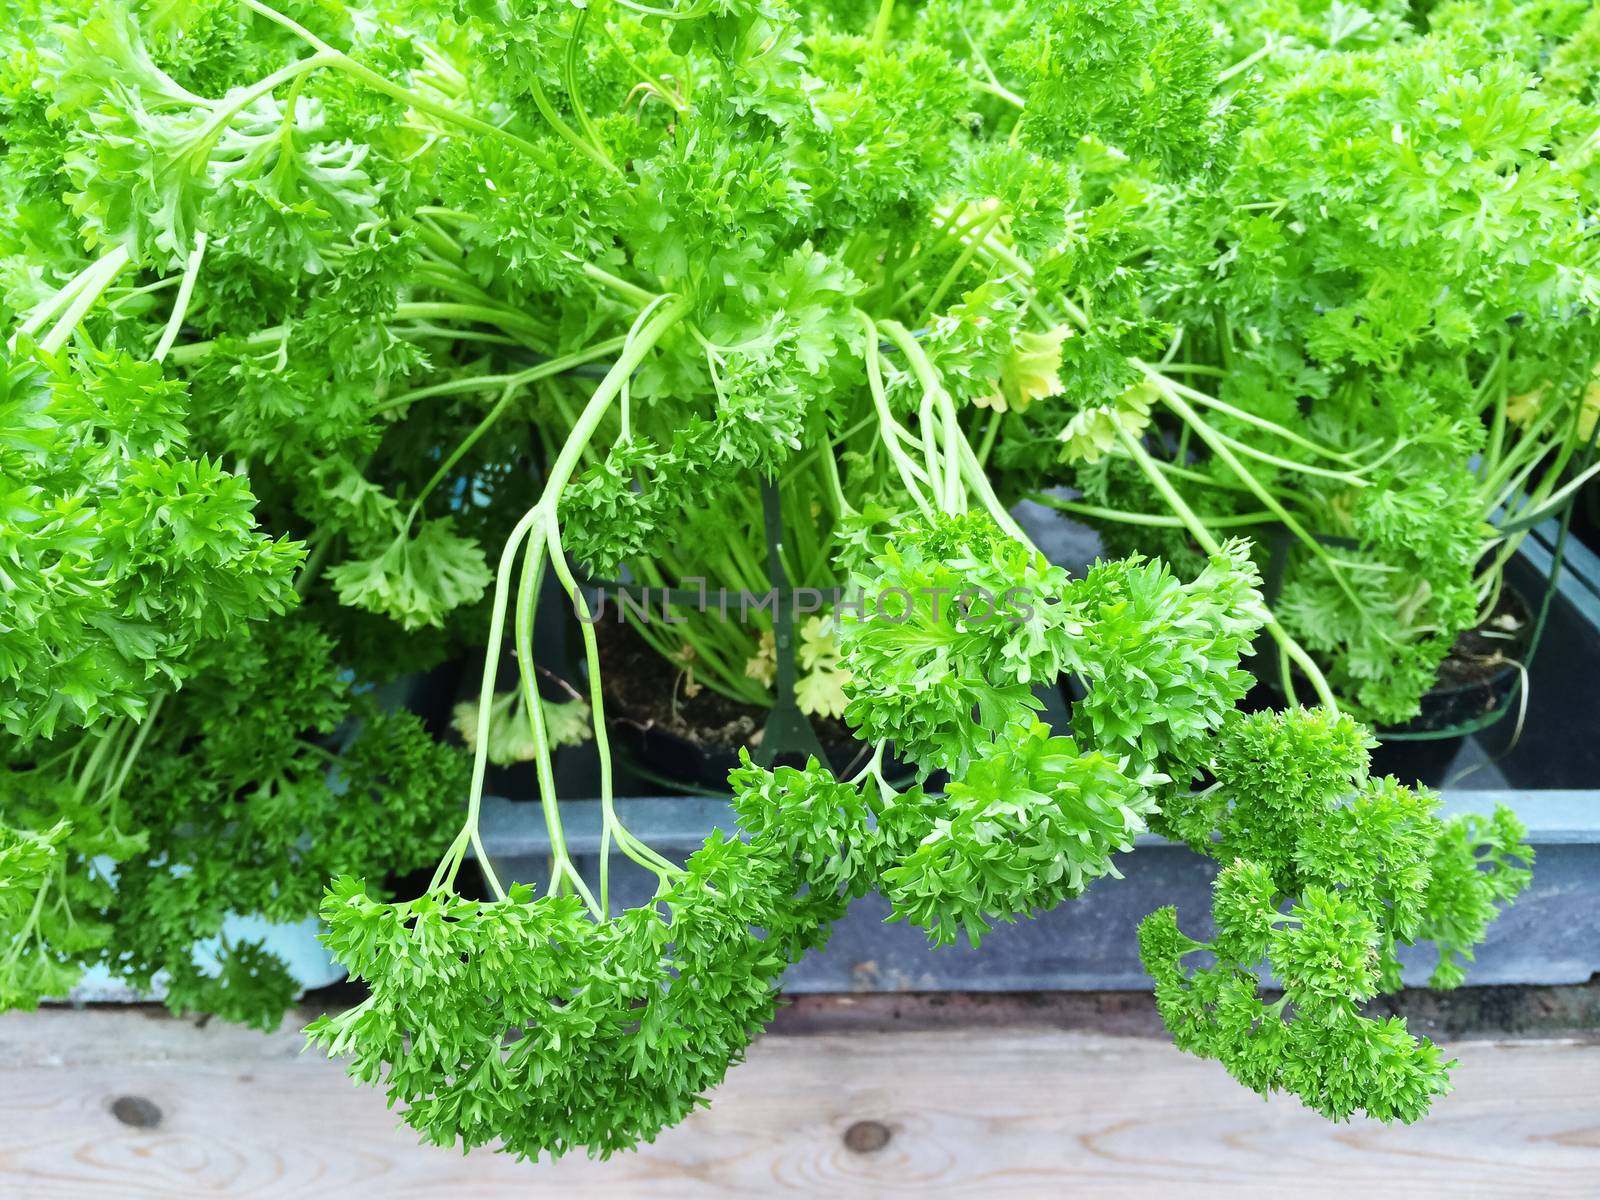 Close-up of green curly parsley growing in pots.